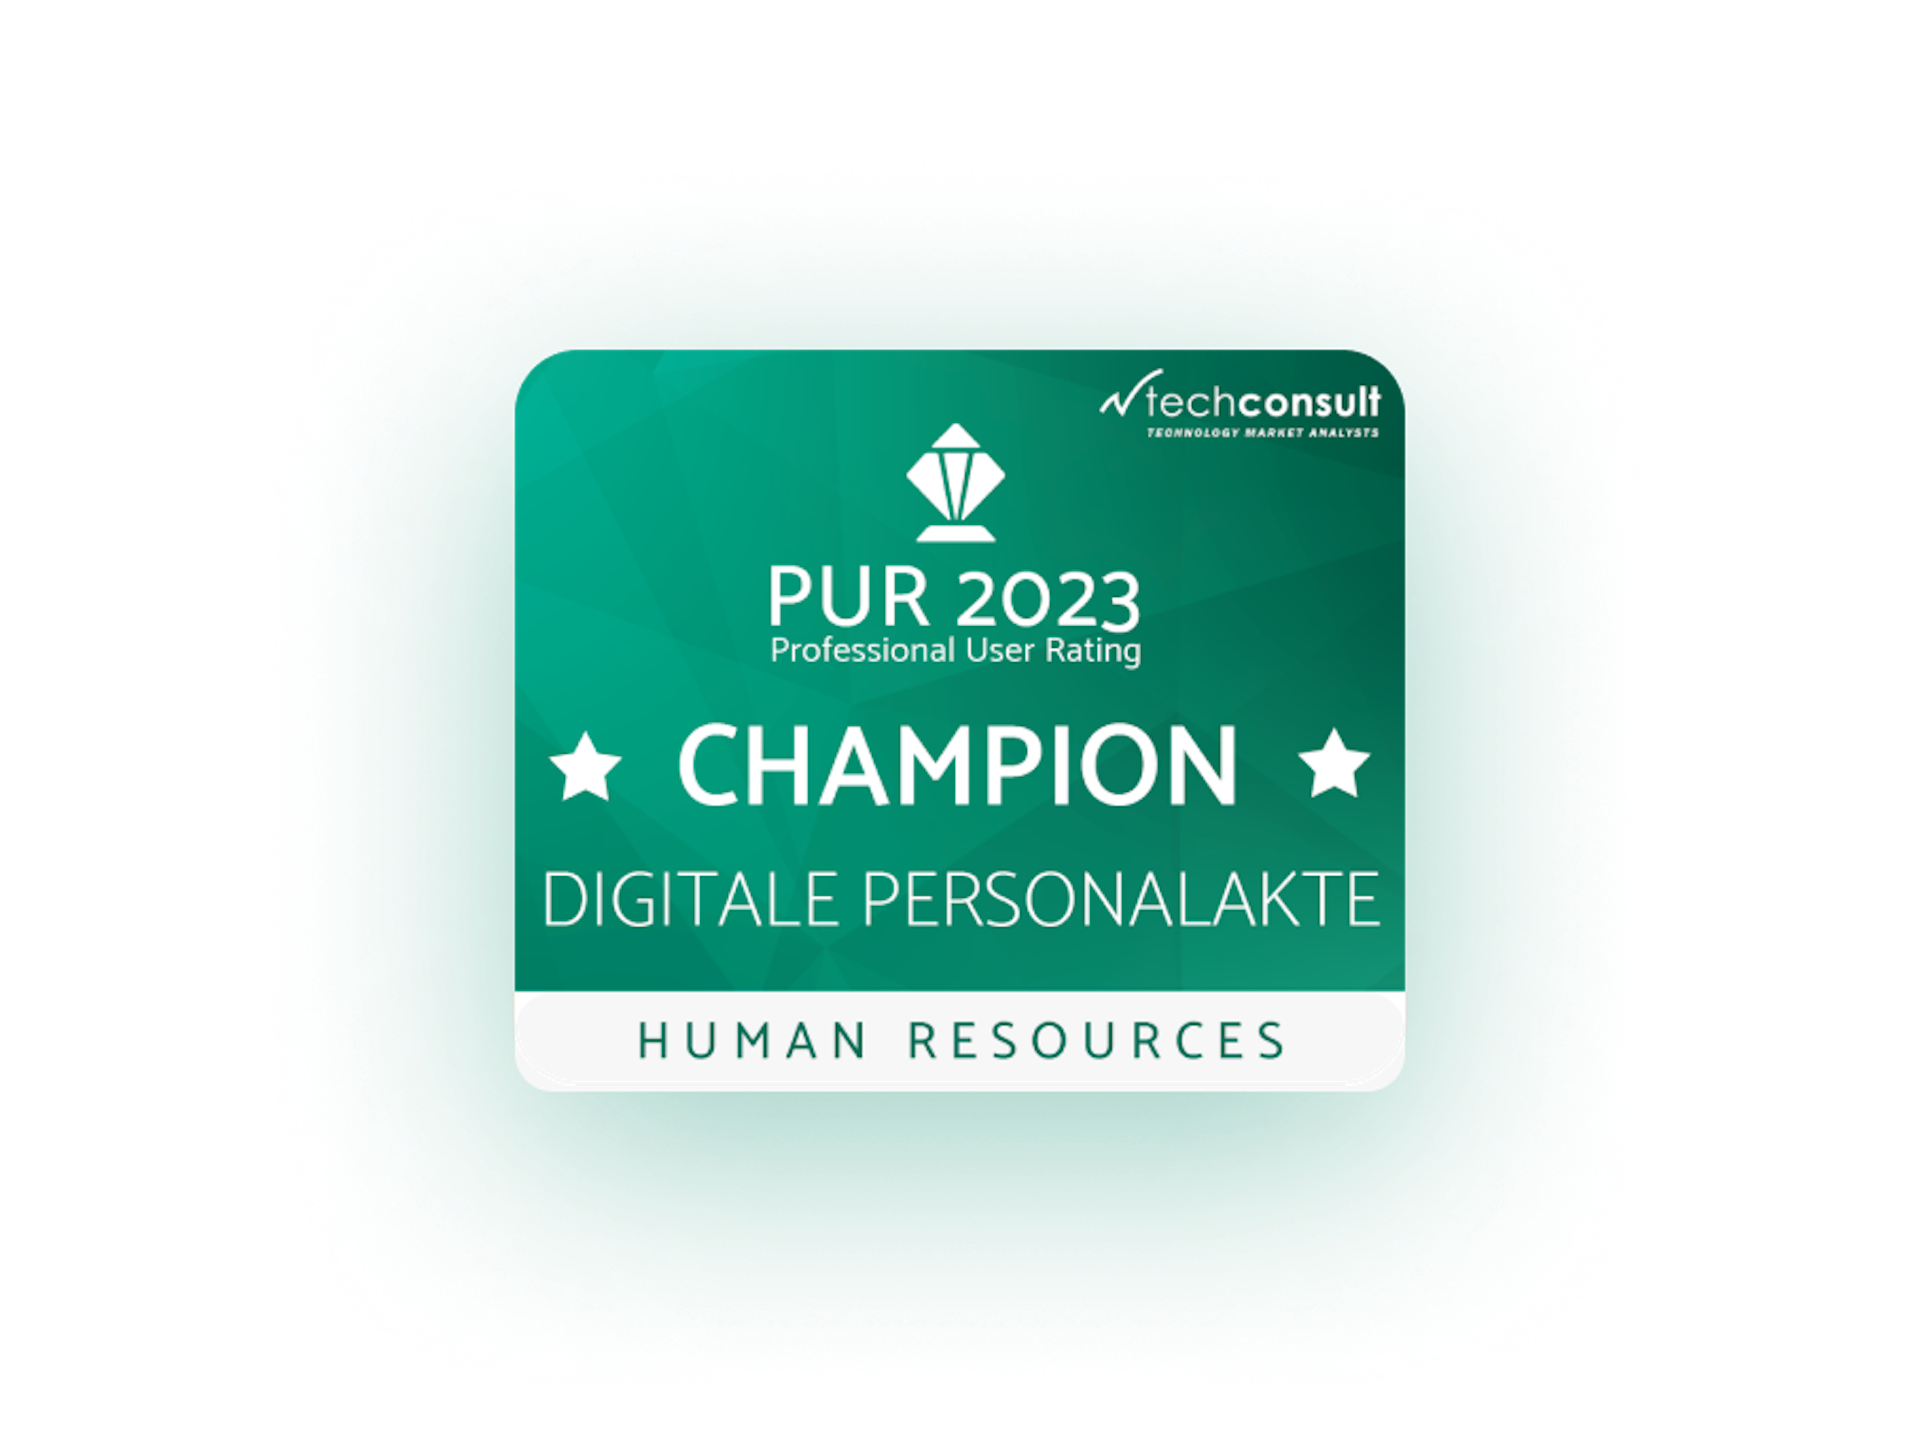 The PUR 2023 badge for digital personal file